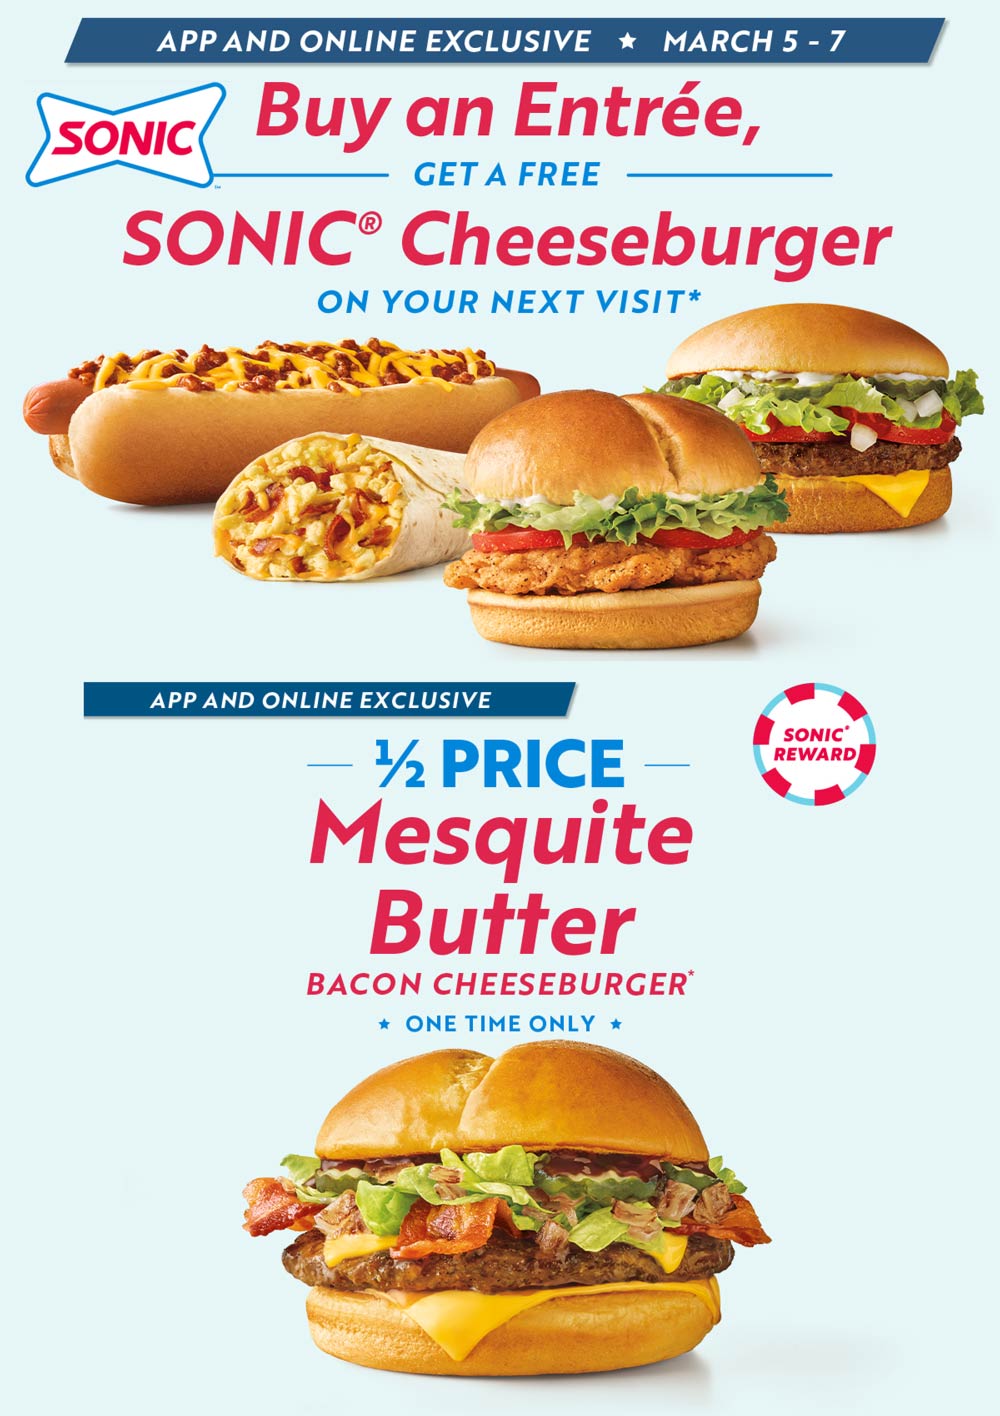 Sonic Drive-In restaurants Coupon  Followup cheeseburger free with your entree online at Sonic Drive-In #sonicdrivein 